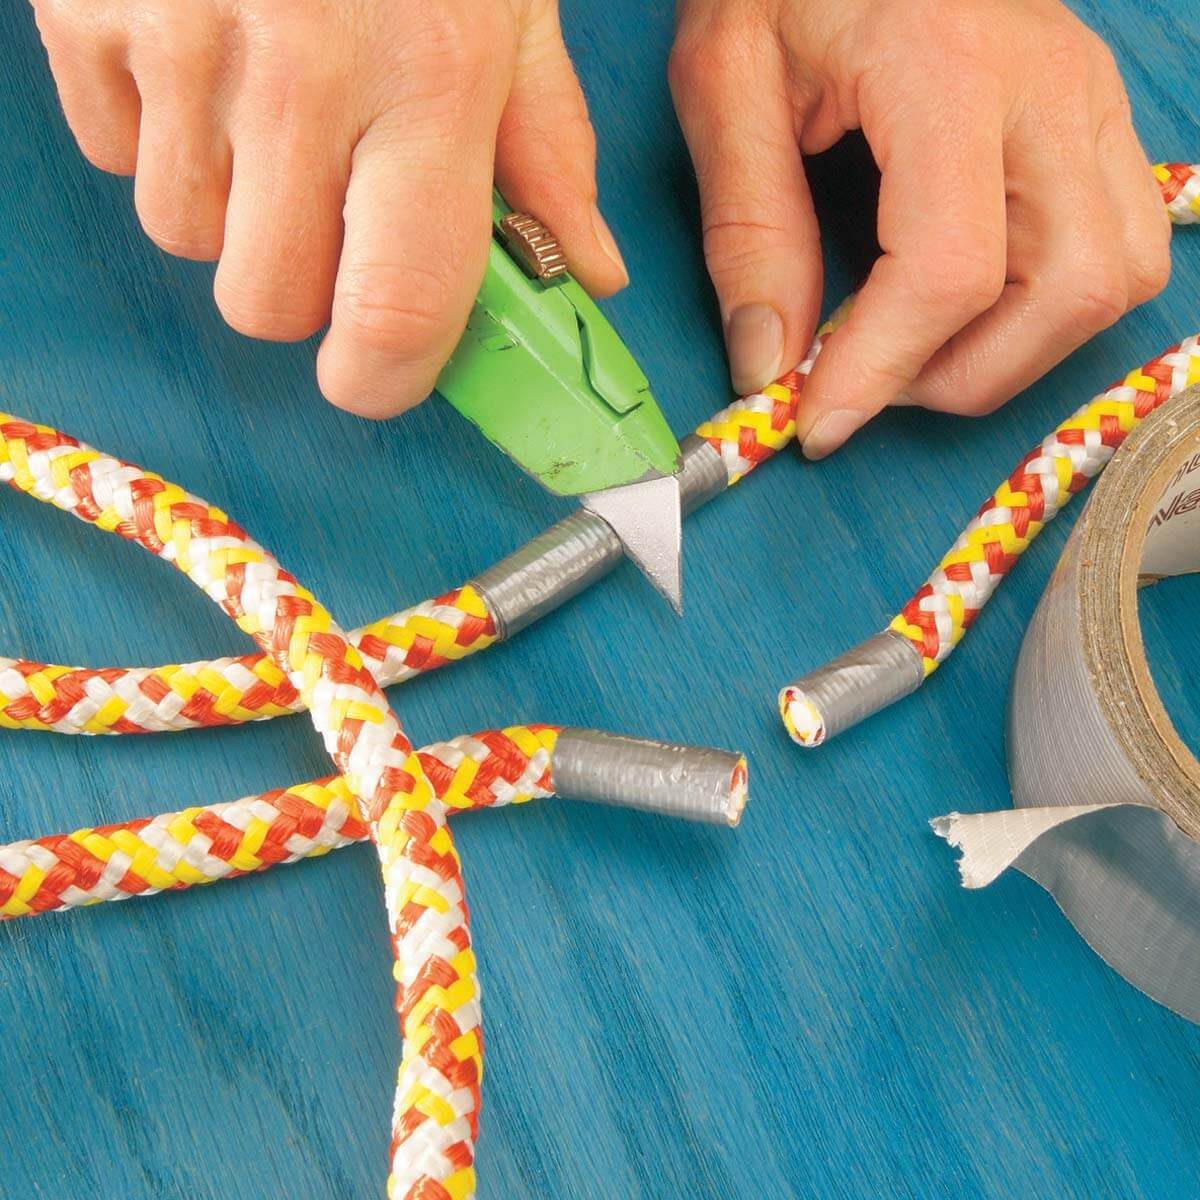 How To Professionally Cut Rope To Avoid Fraying